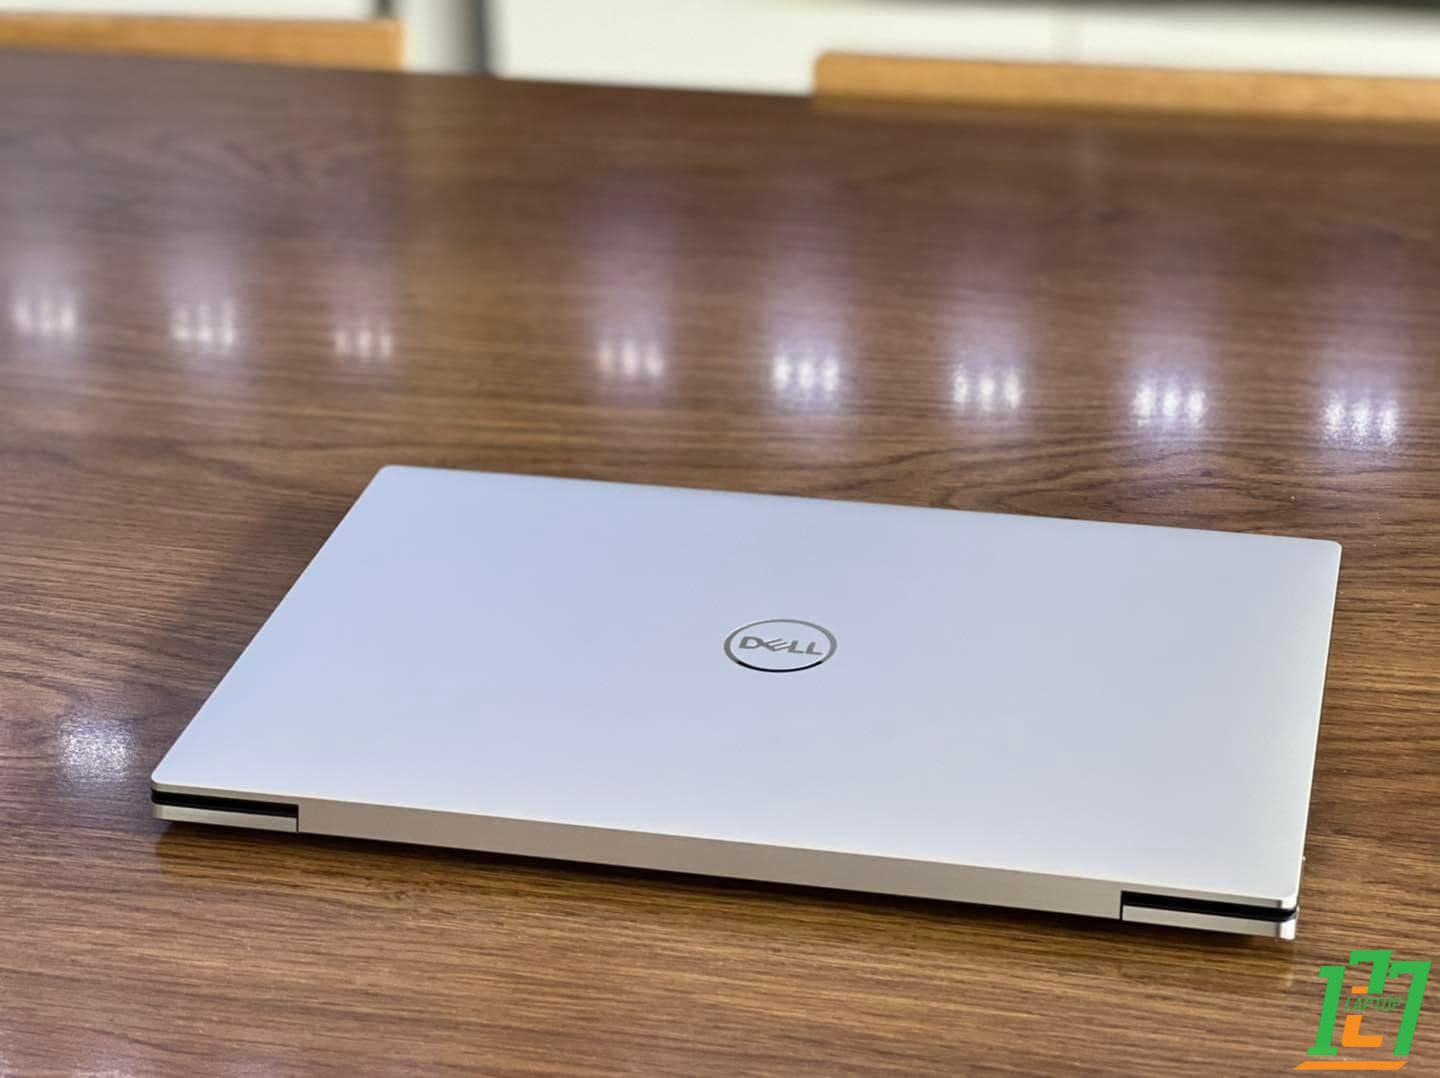 Dell XPS 13 9300 FHD